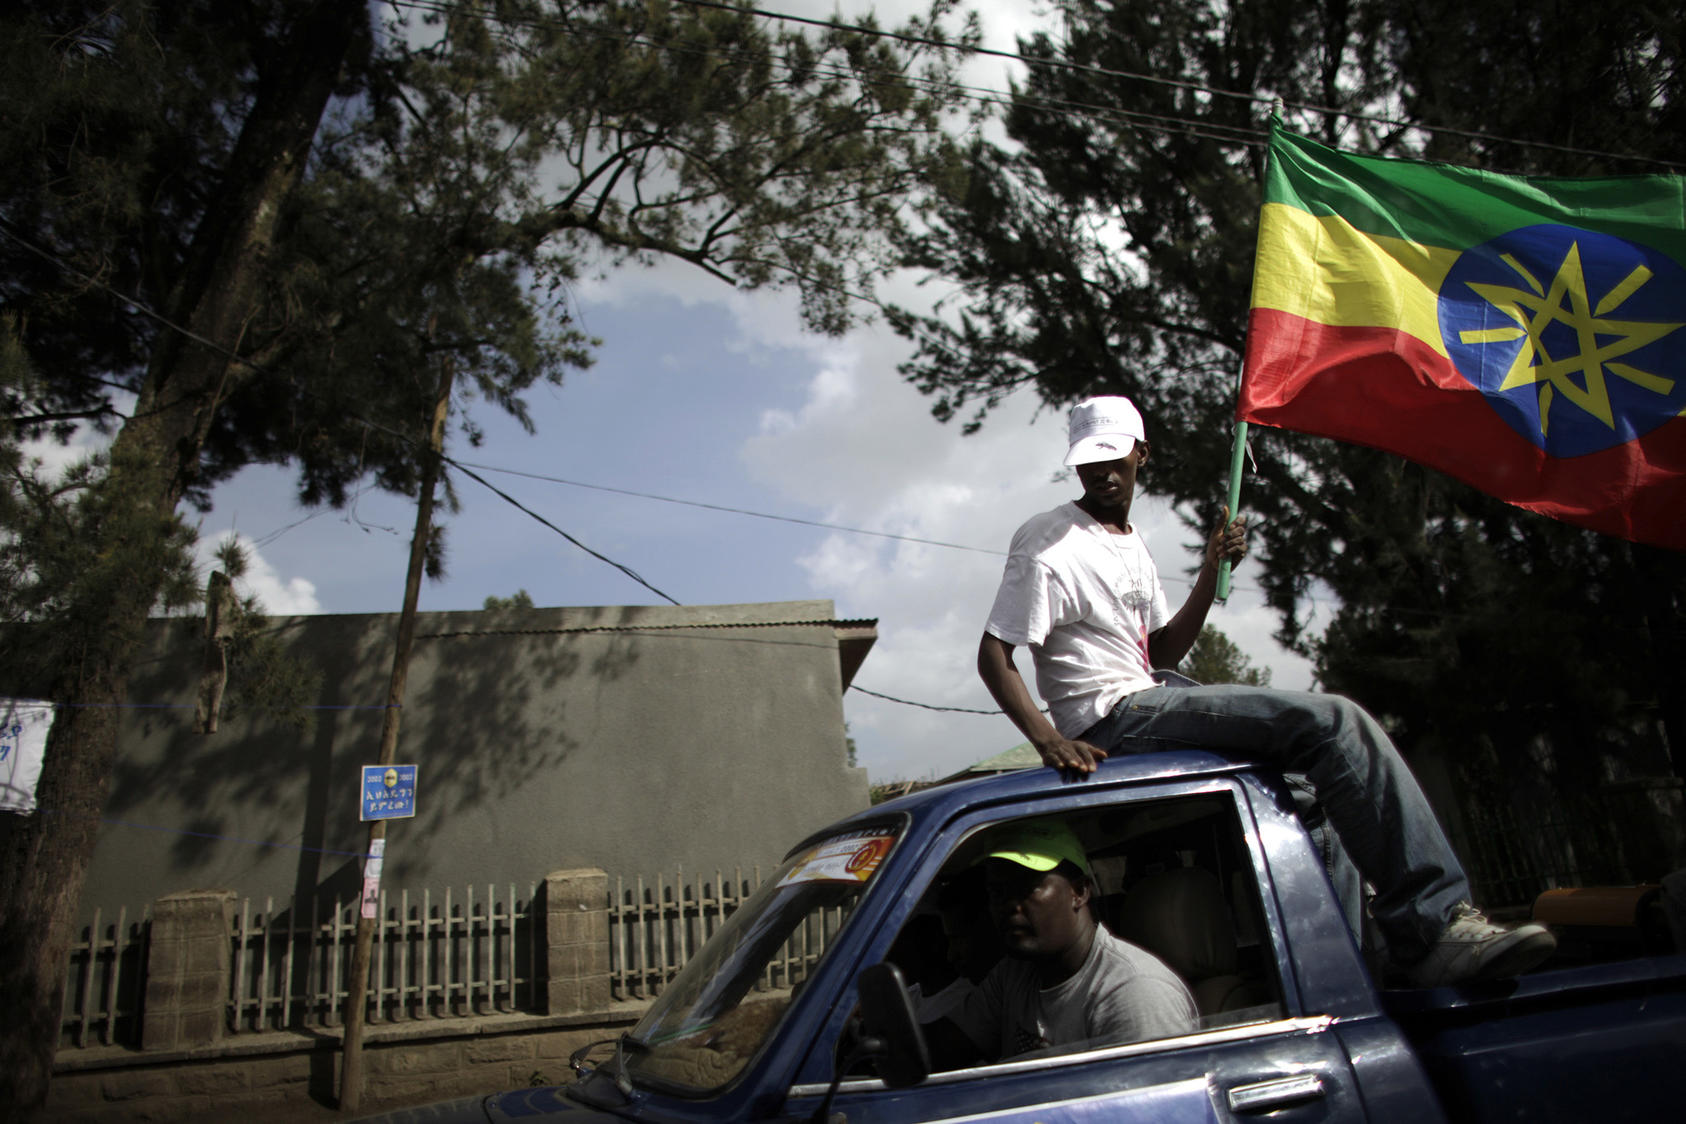 Supporters of the ruling party, Ethiopian Peoples Revolutionary Democratic Front, rally in cars with the national flag in Addis Ababa, Ethiopia, May 19, 2010. (Ed Ou/The New York Times)